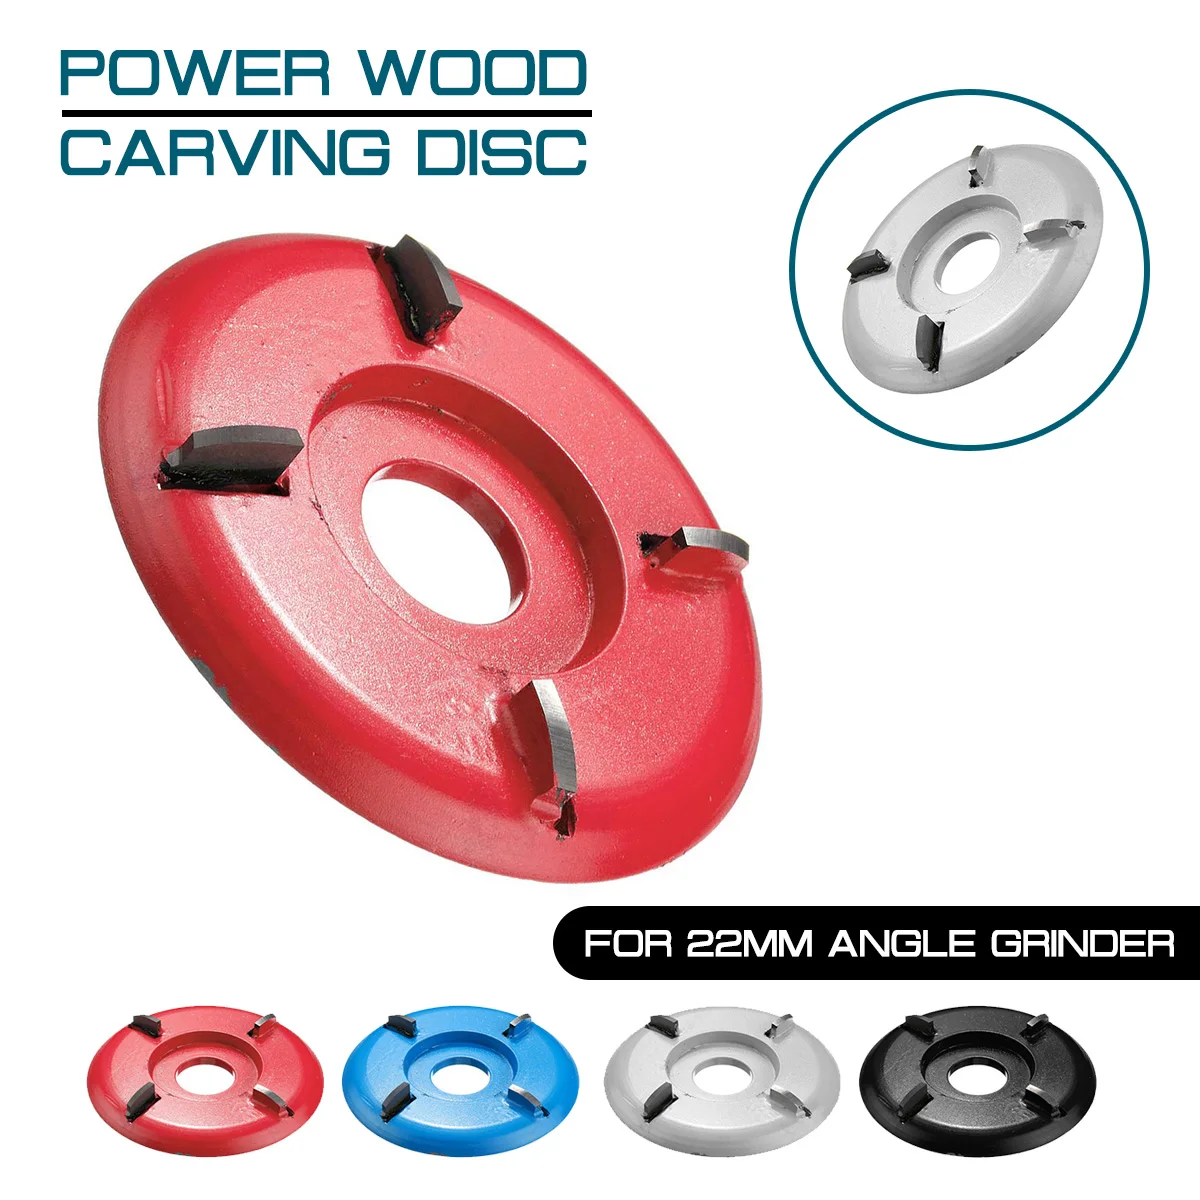 

Grinder For 22mm Angle Tool 90mm H22 Power Wood Carving Disc Milling Cutter Four-tooth Arc Woodworking Turbo Plane Disc Grinder